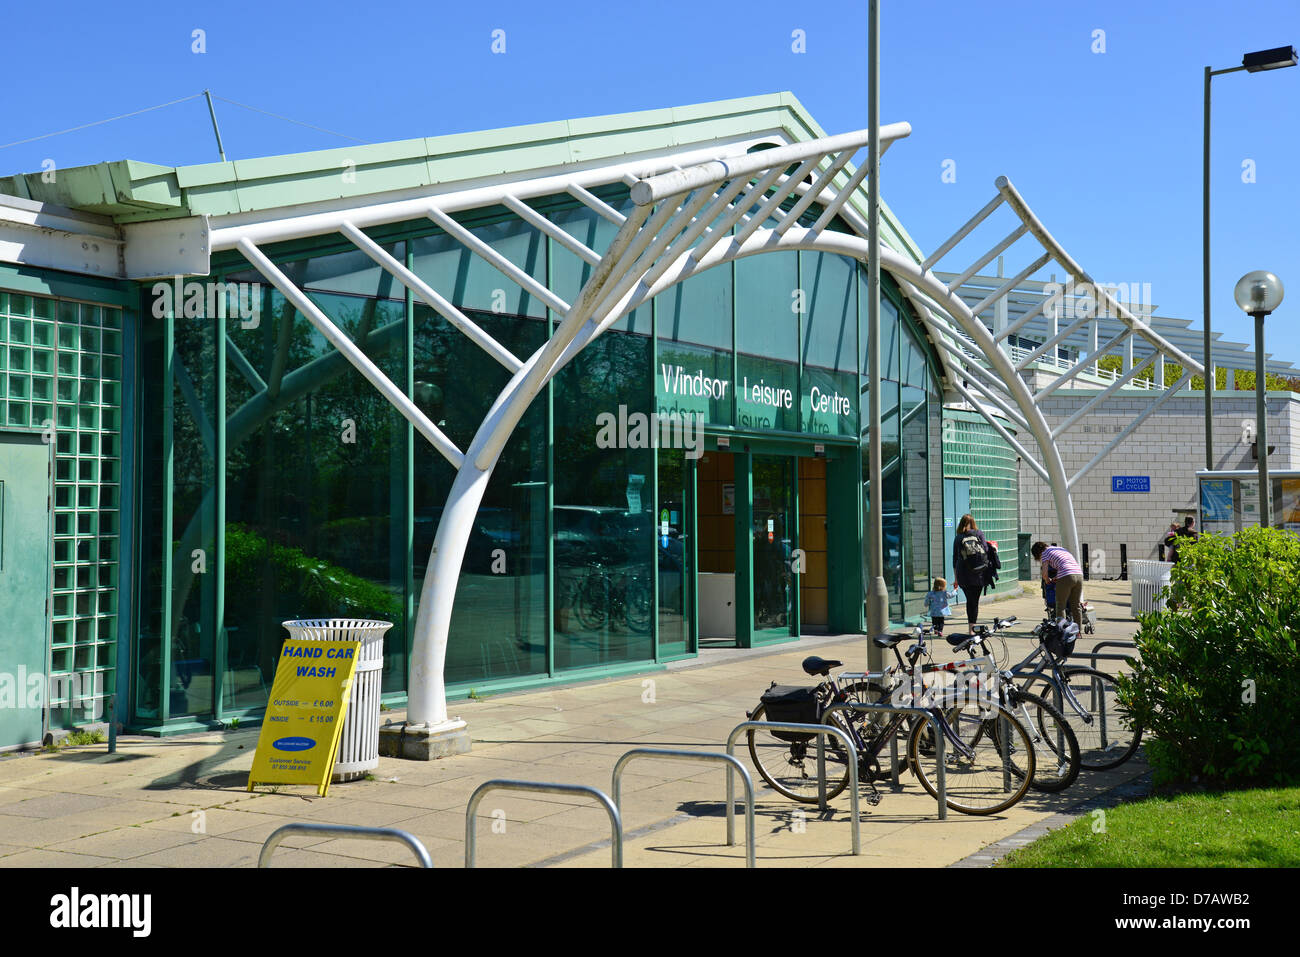 Ingresso al Windsor Leisure Centre, Clewer Mead, Stovell Road, Windsor, Berkshire, Inghilterra, Regno Unito Foto Stock